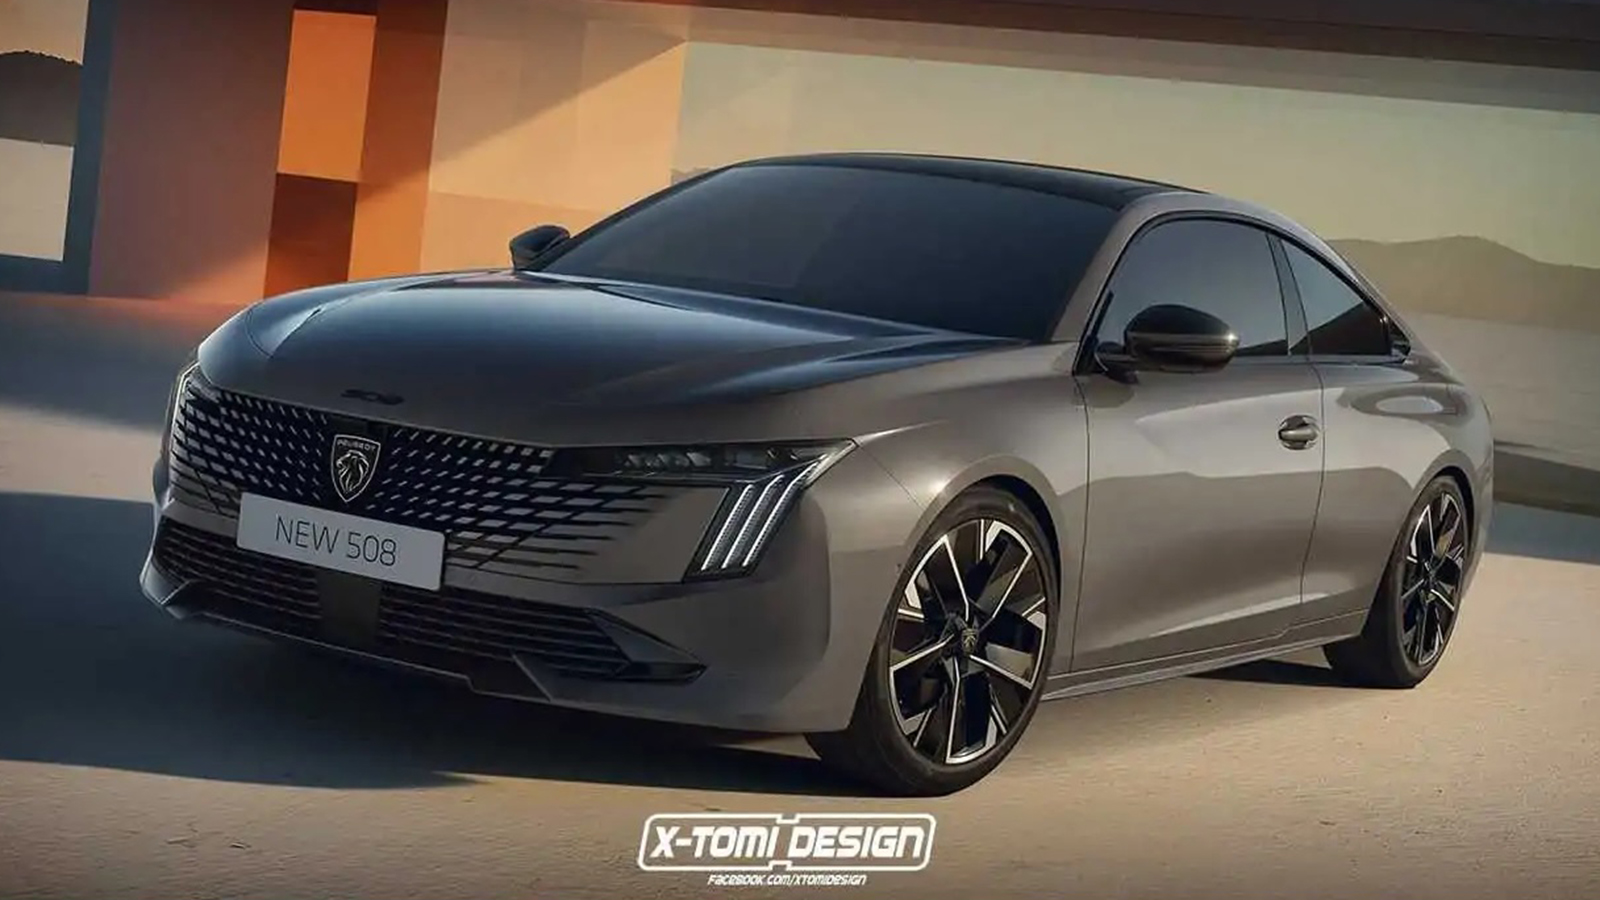 To Peugeot 508 Coupe της X-Tomi Design.